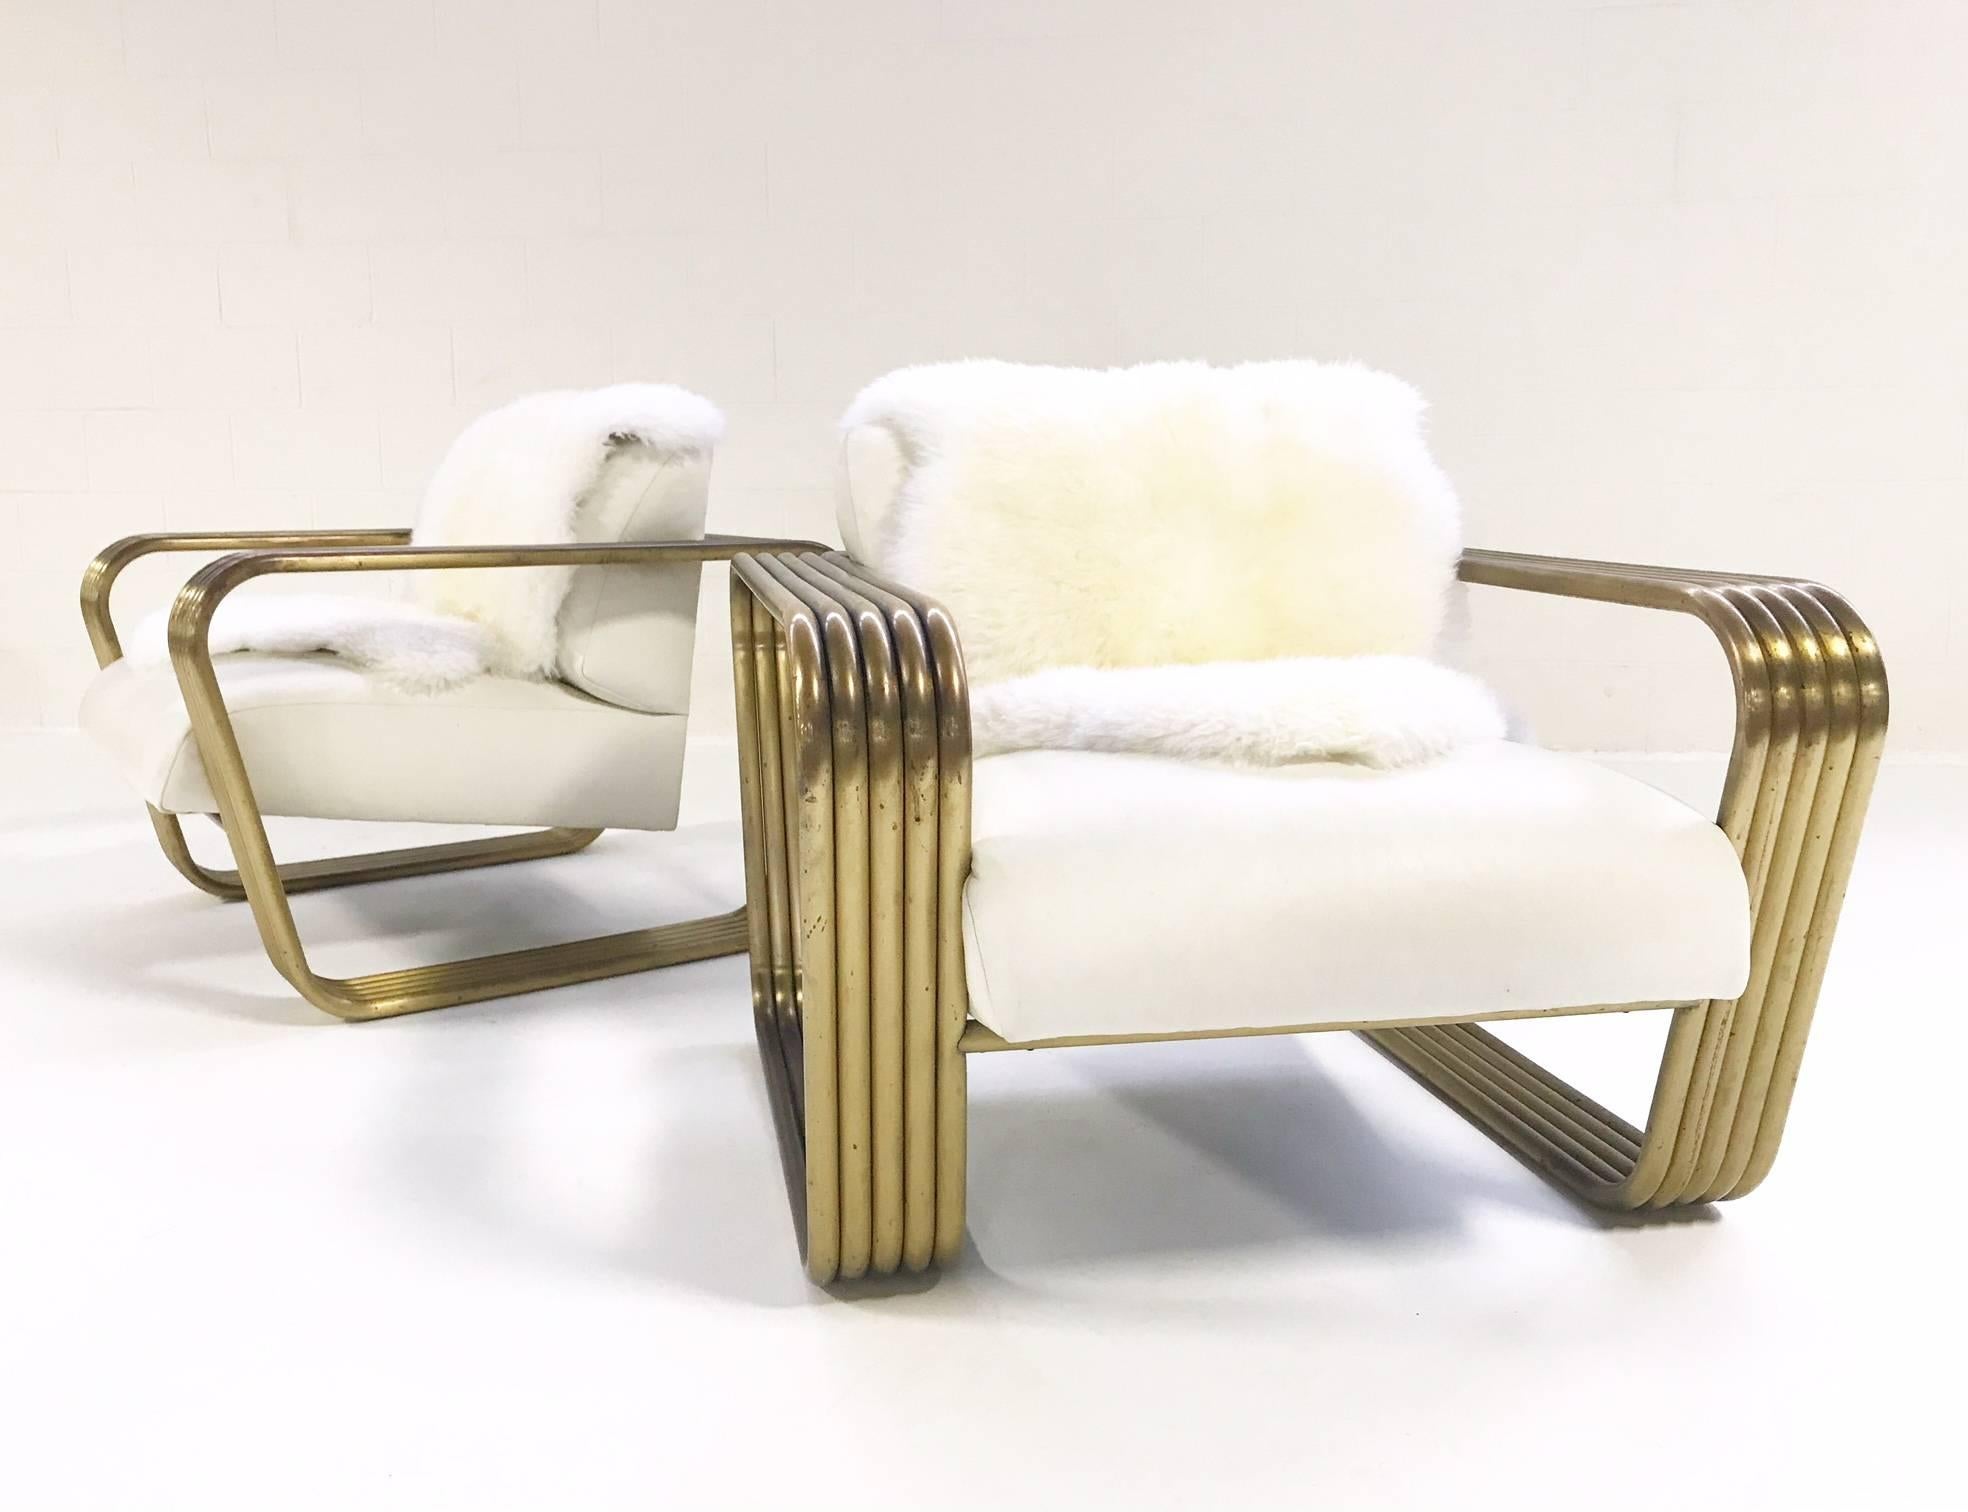 These Art Deco style Jay Spectre lounge chairs (circa 1975) are in such excellent vintage condition we didn't even wanna touch 'em! The tubular brass is perfectly worn and perfectly stellar, the white leather is supple and smooth. 

Measures: 34